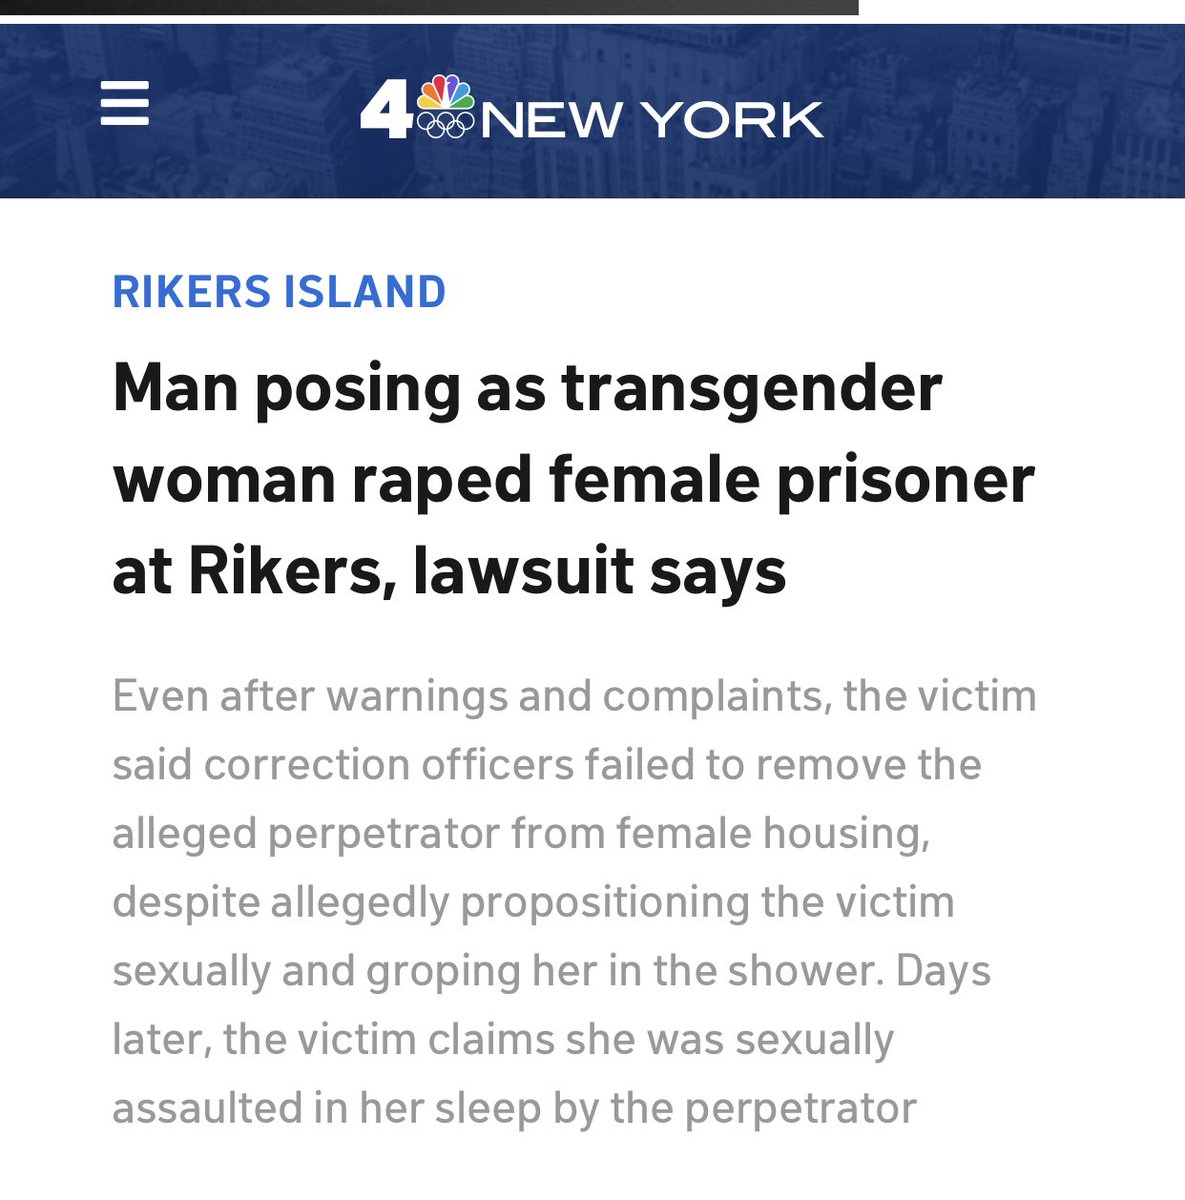 Transwomen is the dems “rebrand” for sex offenders and pedophiles. If your a man but say your a women, dems will give you full access to rape women and molest children. I stand by this statement, “transwomen” percentage wise, are now one of the HIGHEST sexual offender categories.